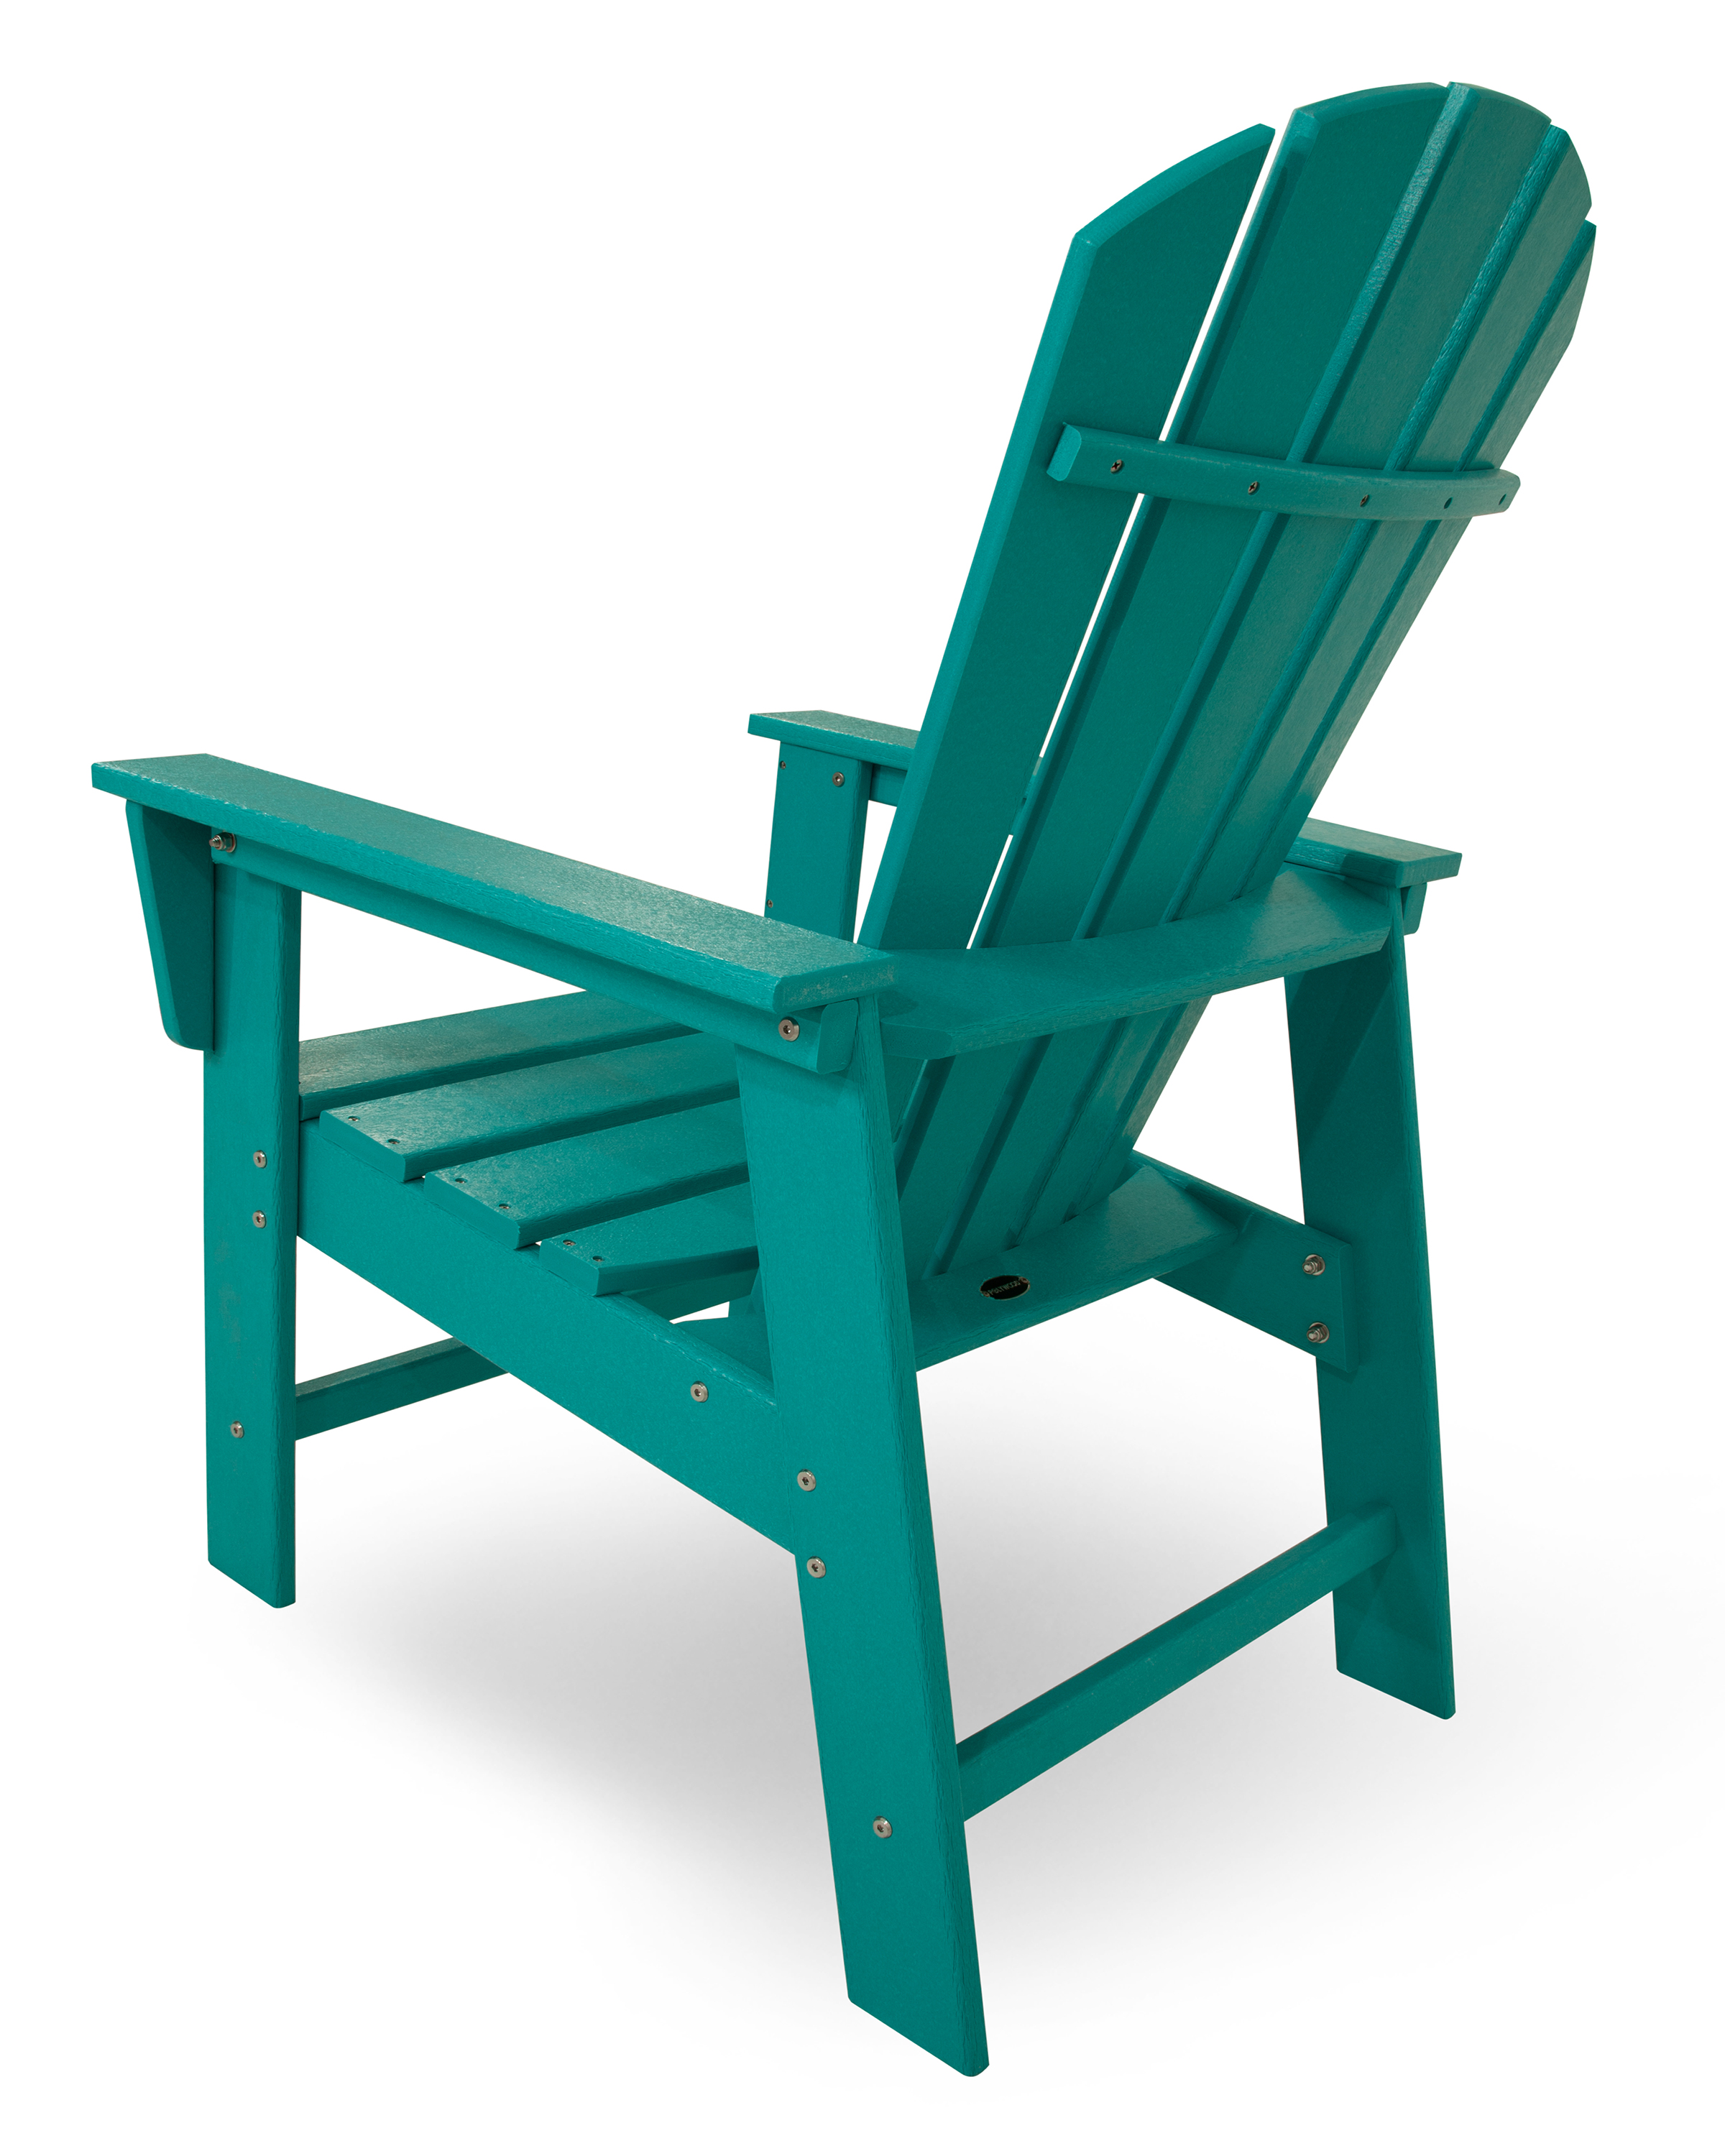 Create A World-class Dining Experience In Your Own Back Yard With The South Beach Dining Chair. Polywood Furniture Is Constructed Of Solid Polywood Lumber That